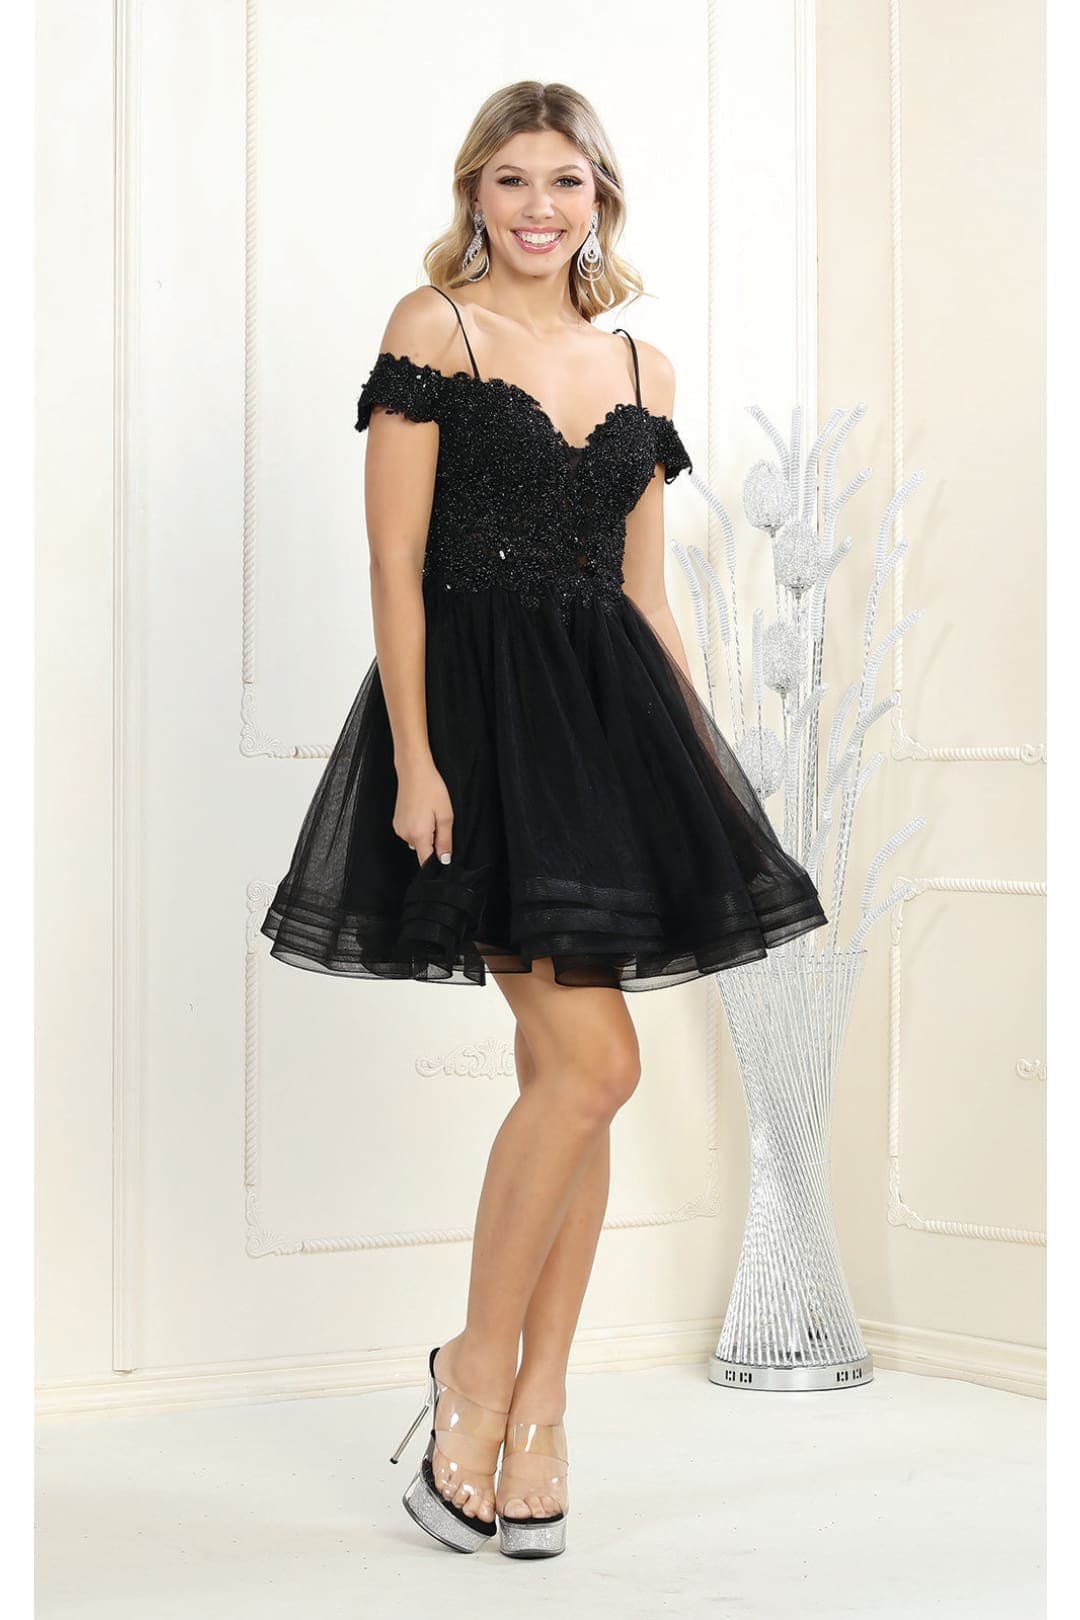 May Queen MQ1897 Cold Shoulder Short Dresses For Homecoming - BLACK / 2